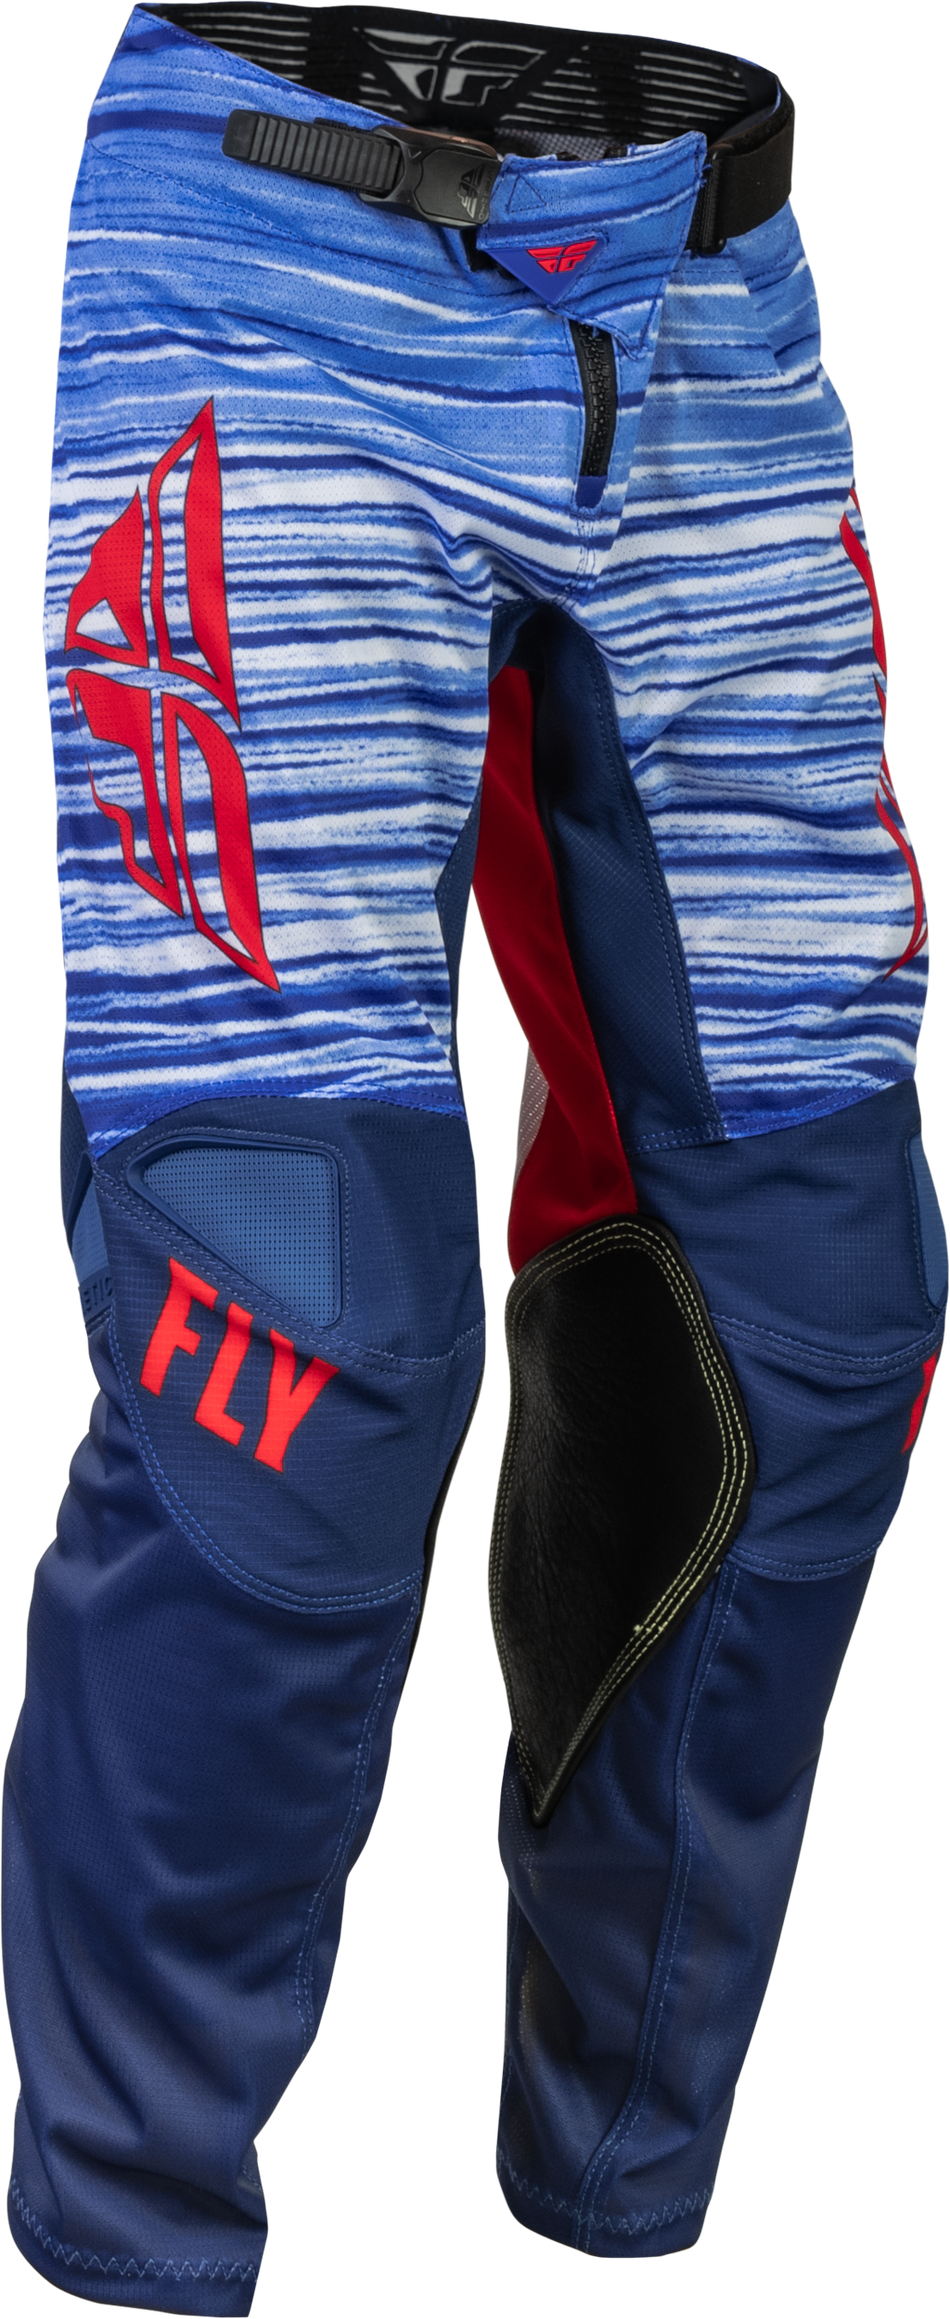 FLY RACING Youth Kinetic Mesh Pants Red/White/Blue Sz 26 376-34426